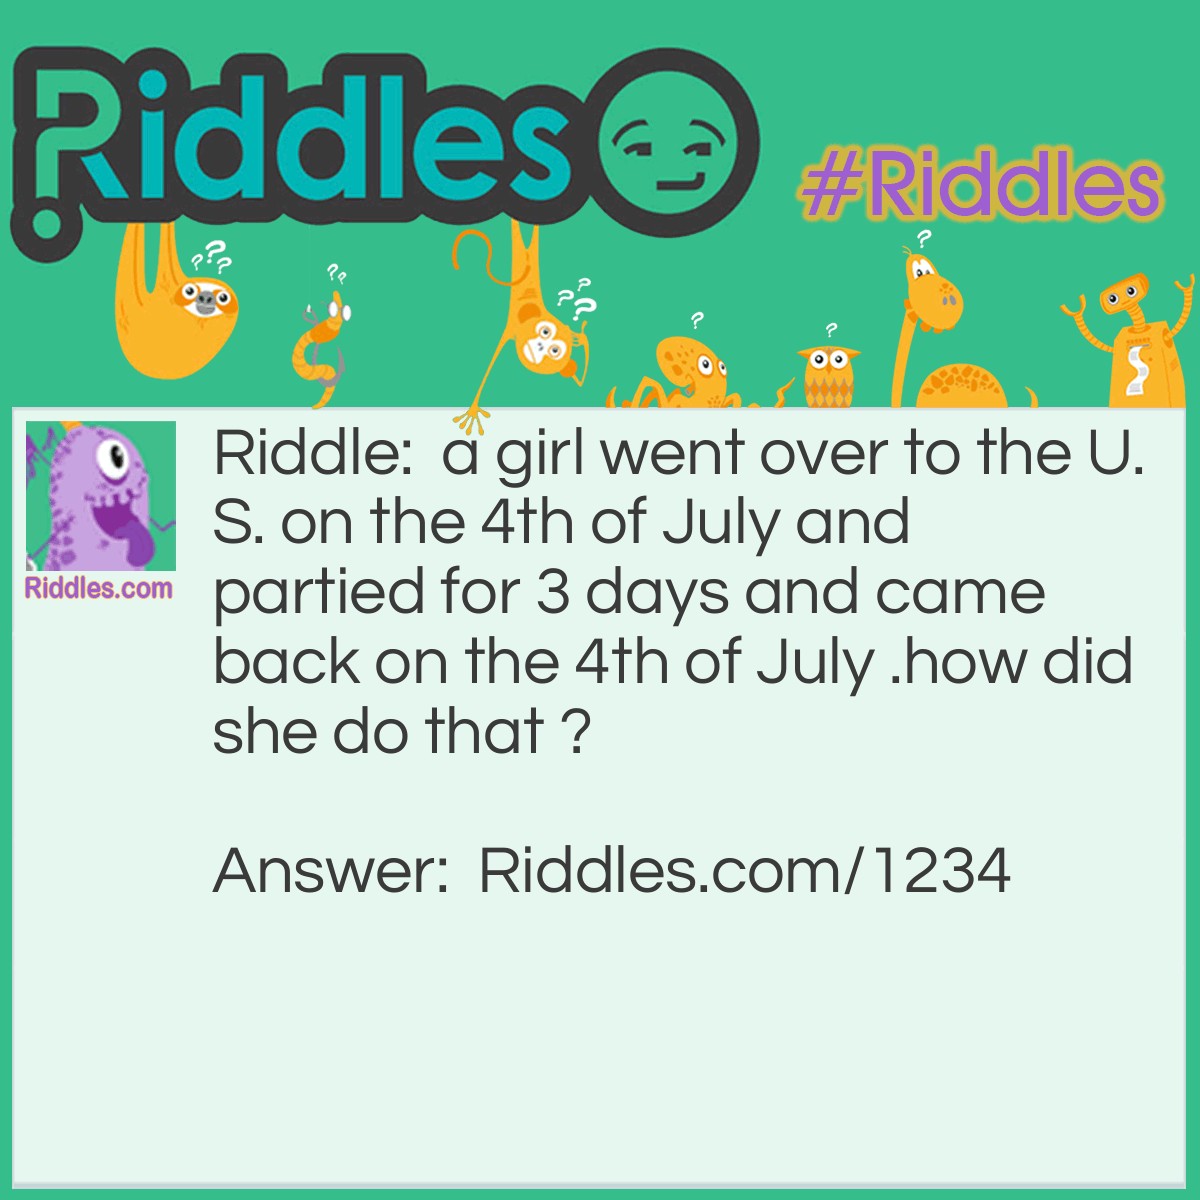 Riddle: A girl went over to the U.S. on the 4th of July and partied for 3 days and came back on the 4th of July. How did she do that? Answer: She went over on the date of the 4th of july and came home on the boat called the 4th of July.